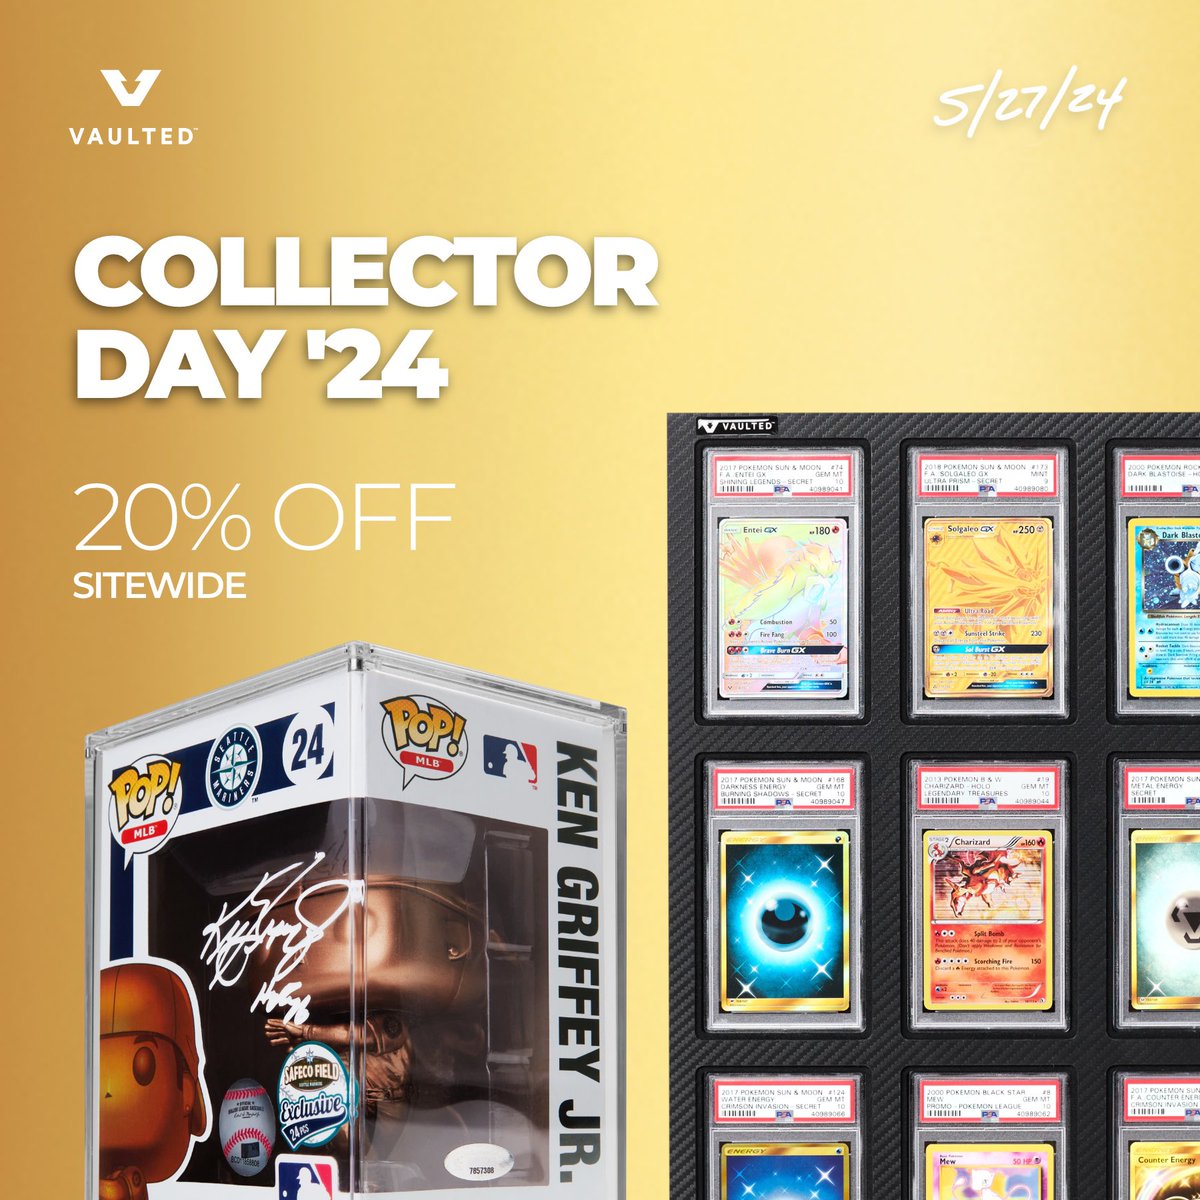 GM team ☀️

Collector Day ‘24 starts tonight at 12AM CT! 

1. 20% off sitewide
2. Free hobby/booster pack with every order

🎁 Help spread the word with a RT, LIKE, or TAG a friend:

(1) participant gets a $200 Vaulted gift card for CD24 and we’ll be dropping free 🔥 in the DMs